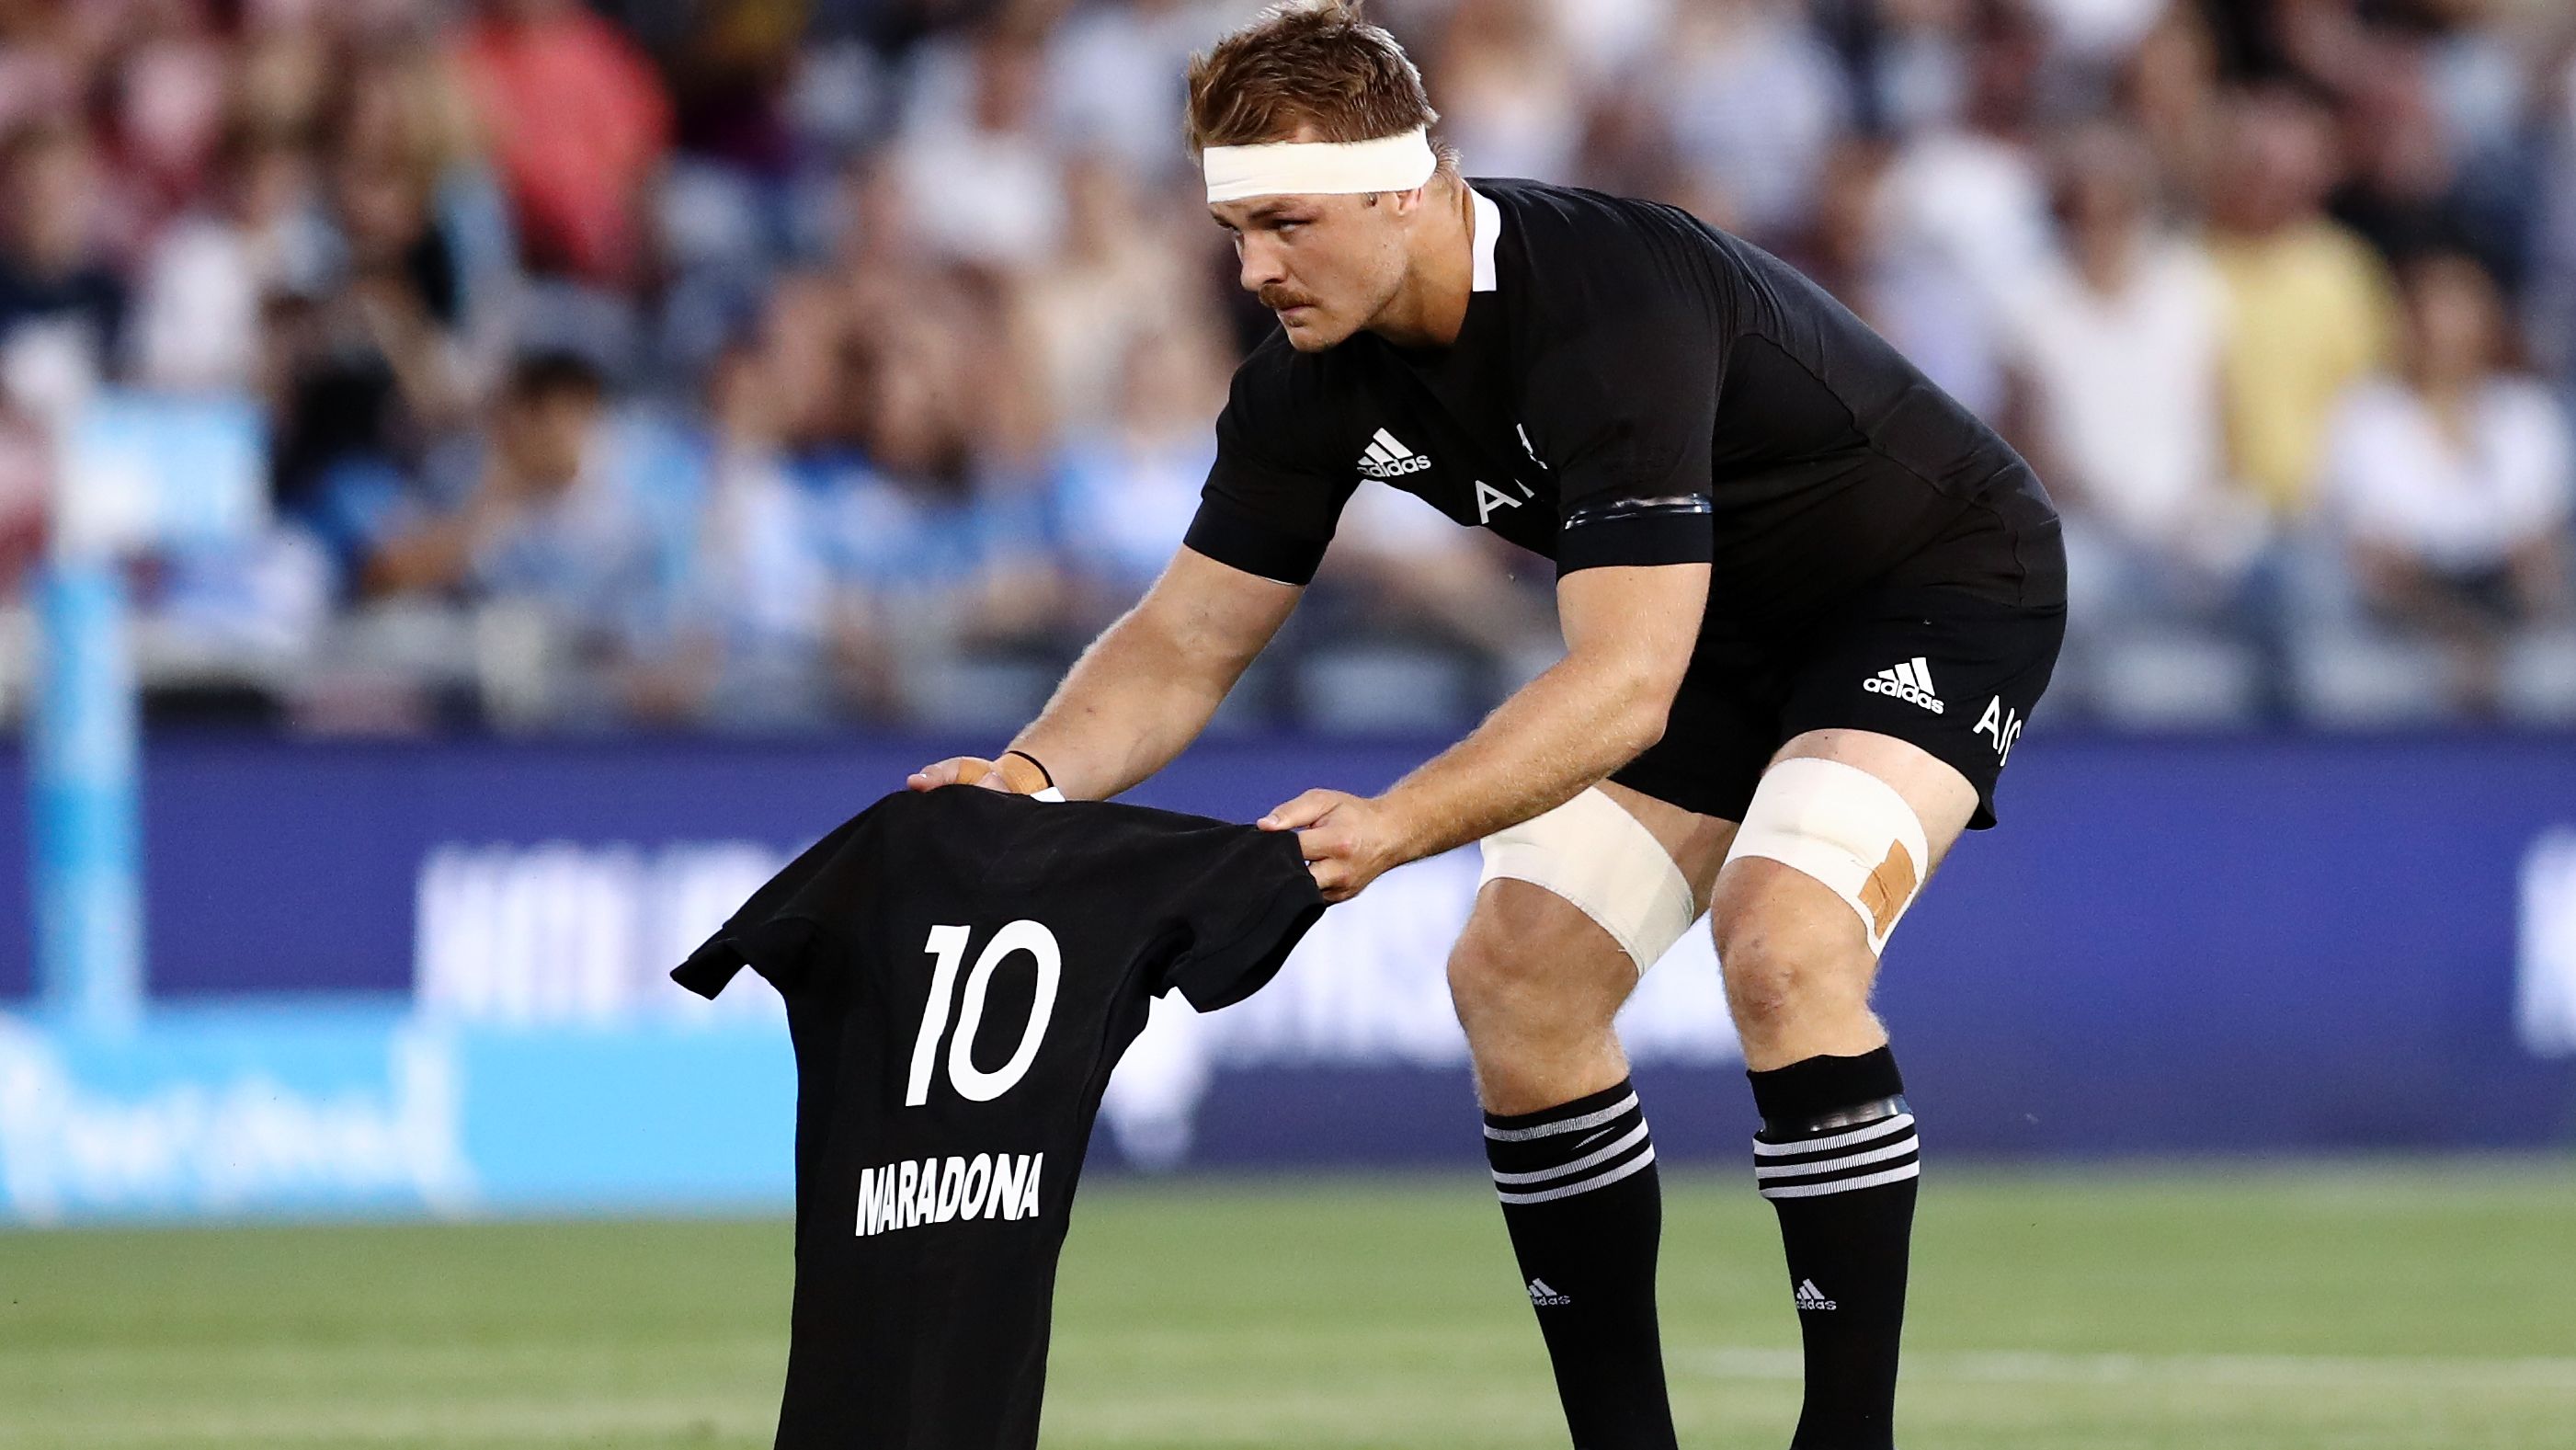 Sam Cane of the All Blacks lays down a number 10 jersey in memory of Diego Maradona.